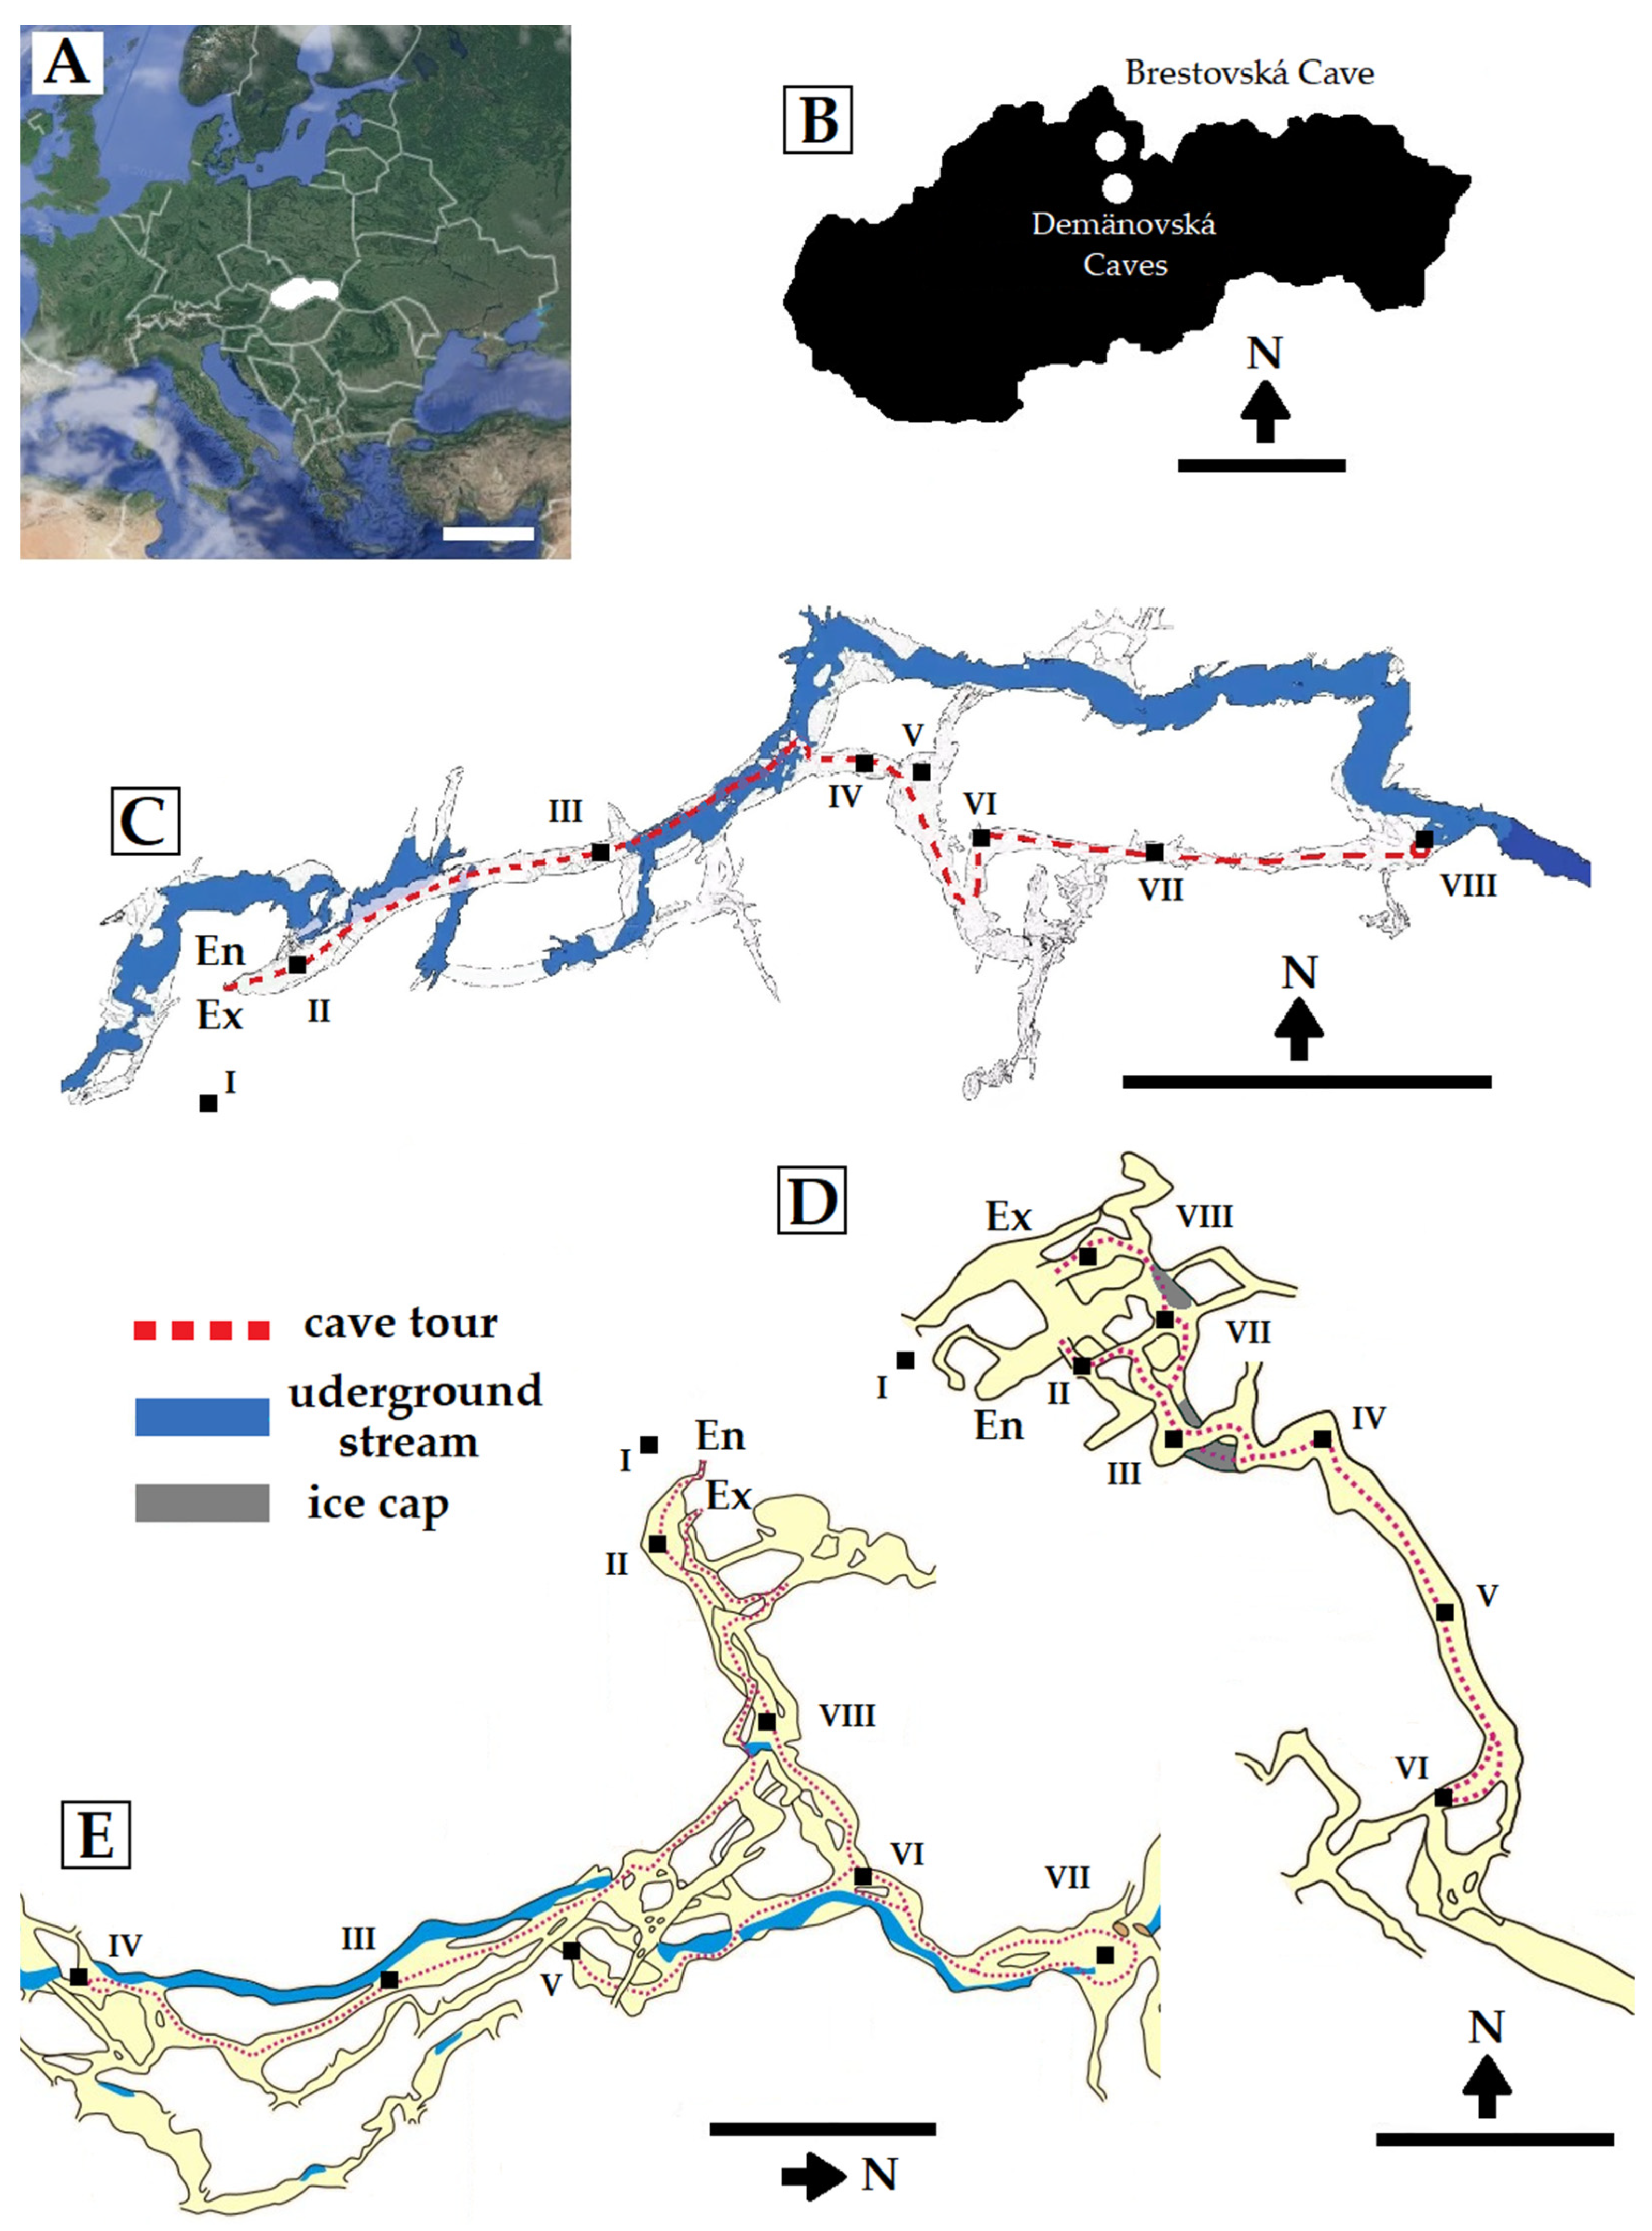 Applied Sciences | Free Full-Text | Keratinophilic and Keratinolytic Fungi  in Cave Ecosystems: A Culture-Based Study of Brestovsk&aacute; Cave and  Dem&auml;novsk&aacute; &#317;adov&aacute; and Slobody Caves (Slovakia) |  HTML